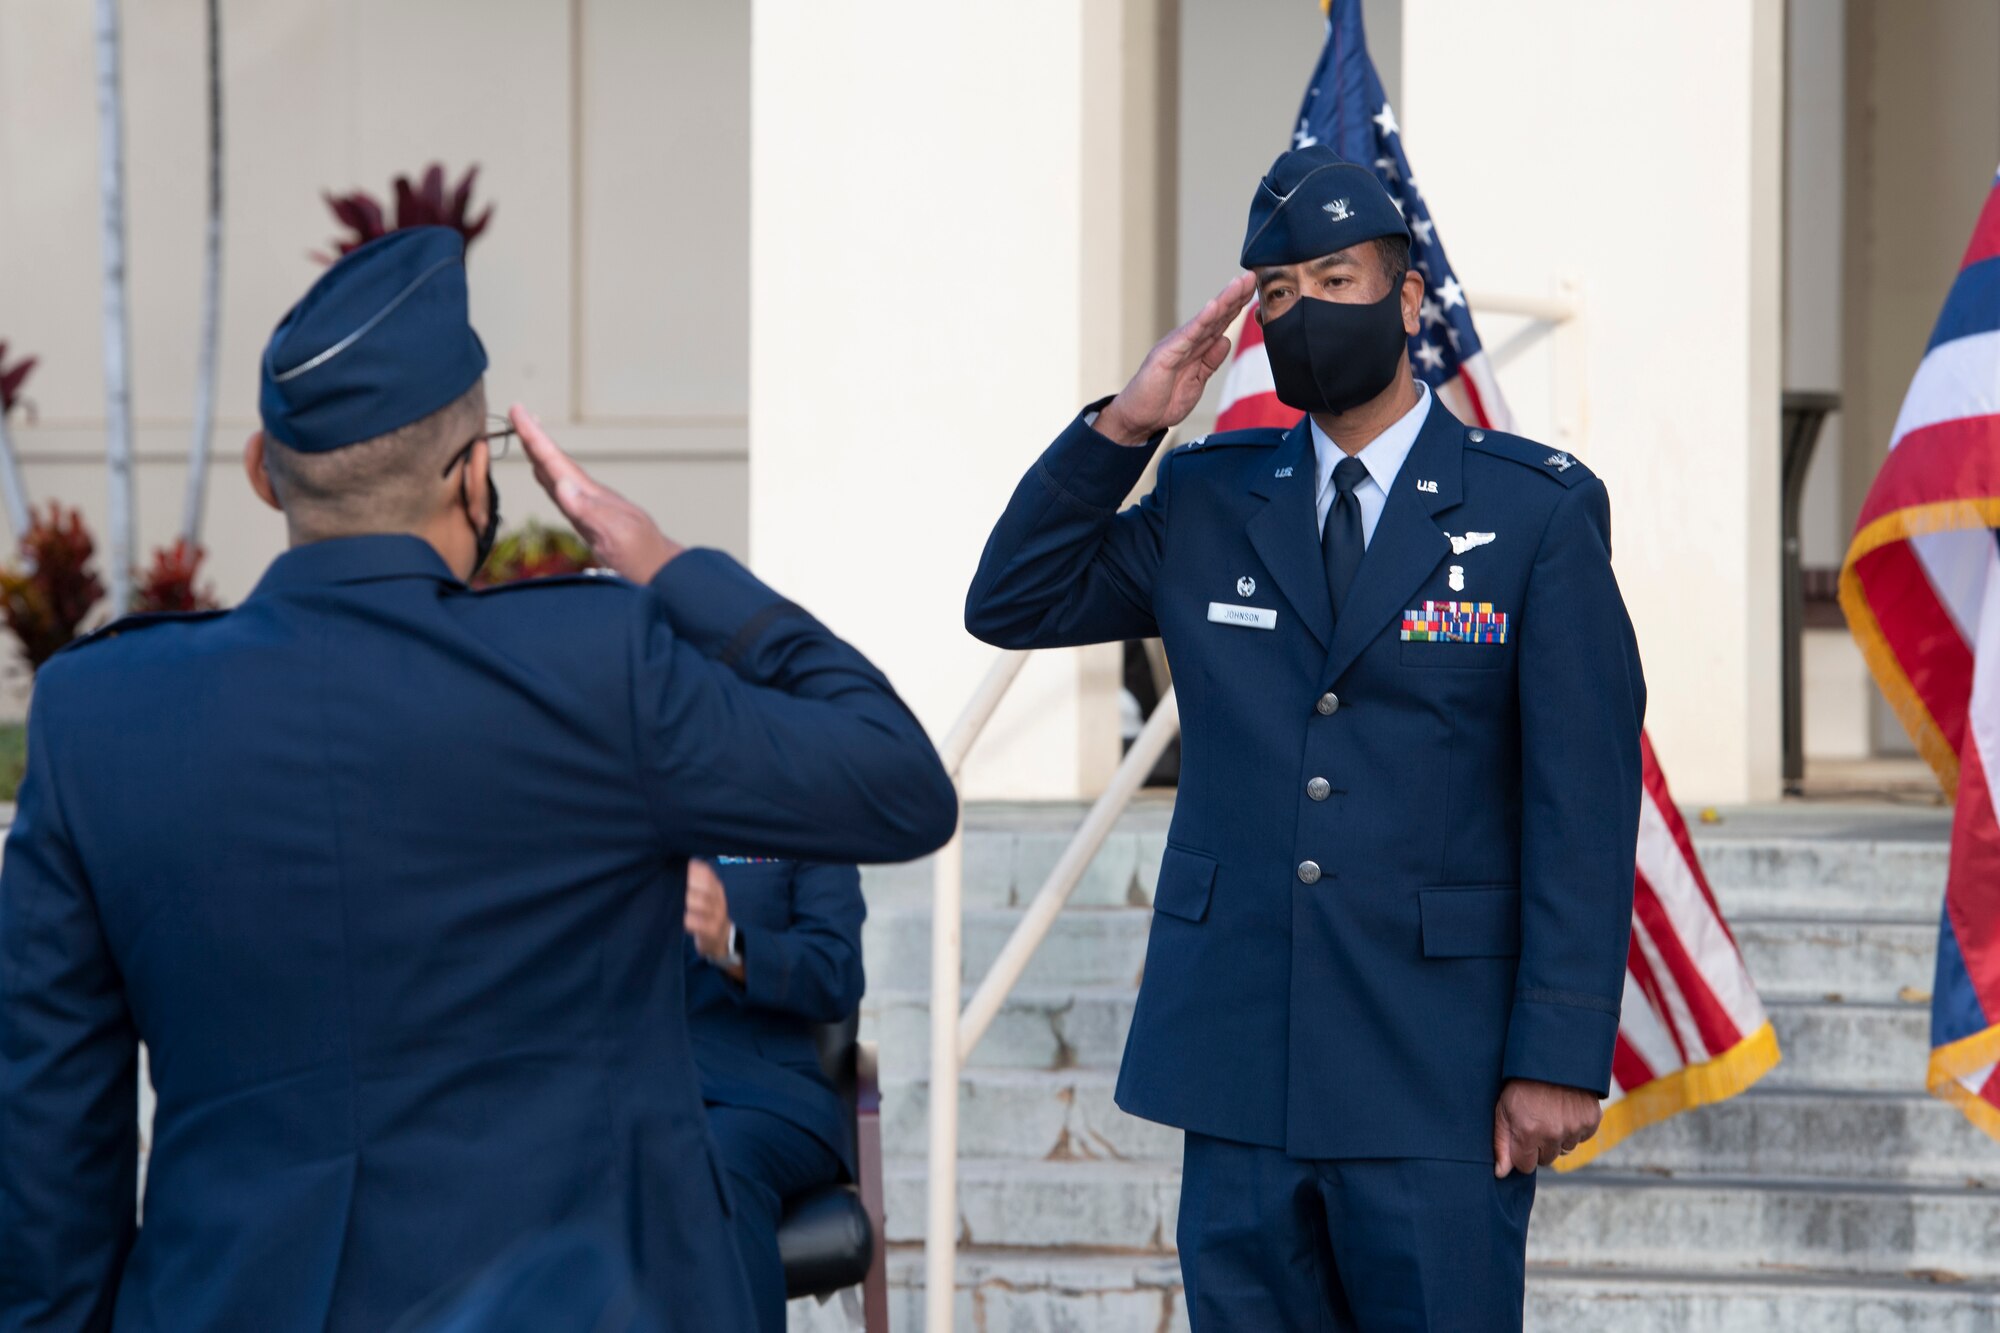 A photo of U.S. Air Force Col. Edward Johnson, receiving his first salute as the 624th Aeromedical Staging Squadron commander from Lt. Col. Regan Ramos, 624th ASTS chief of nursing services, during the 624th ASTS change of command ceremony in front of the 15th Medical Group building at Joint Base Pearl Harbor-Hickam, Hawaii, Aug. 8, 2020.